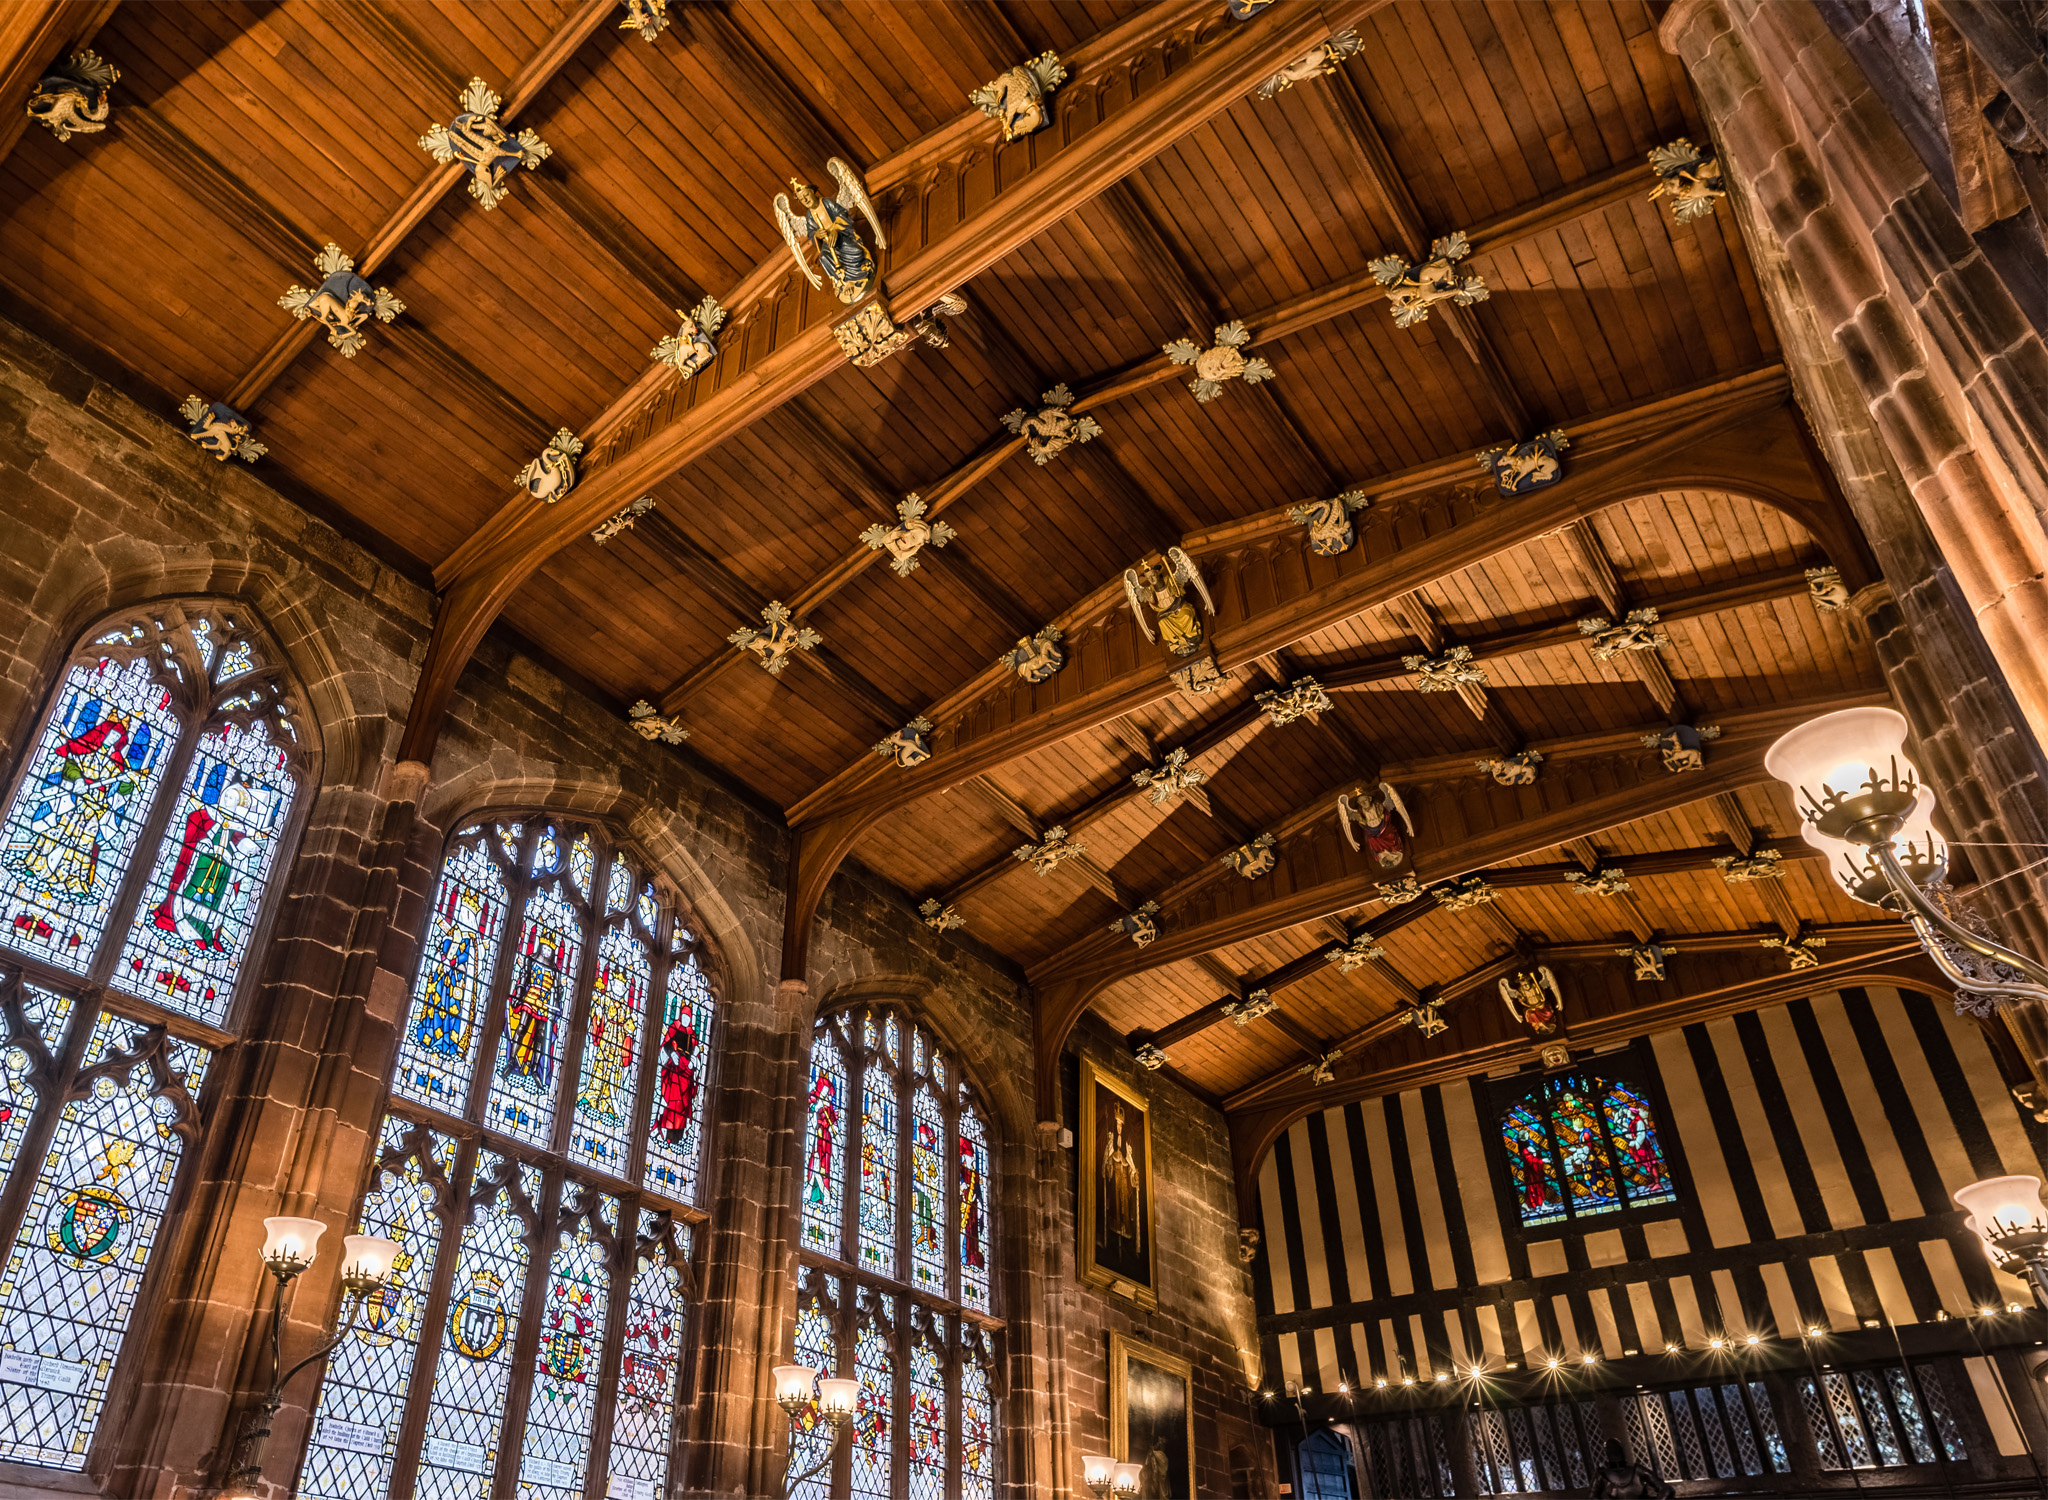 Stained windows and church ceiling inside St Mary's Guildhall.